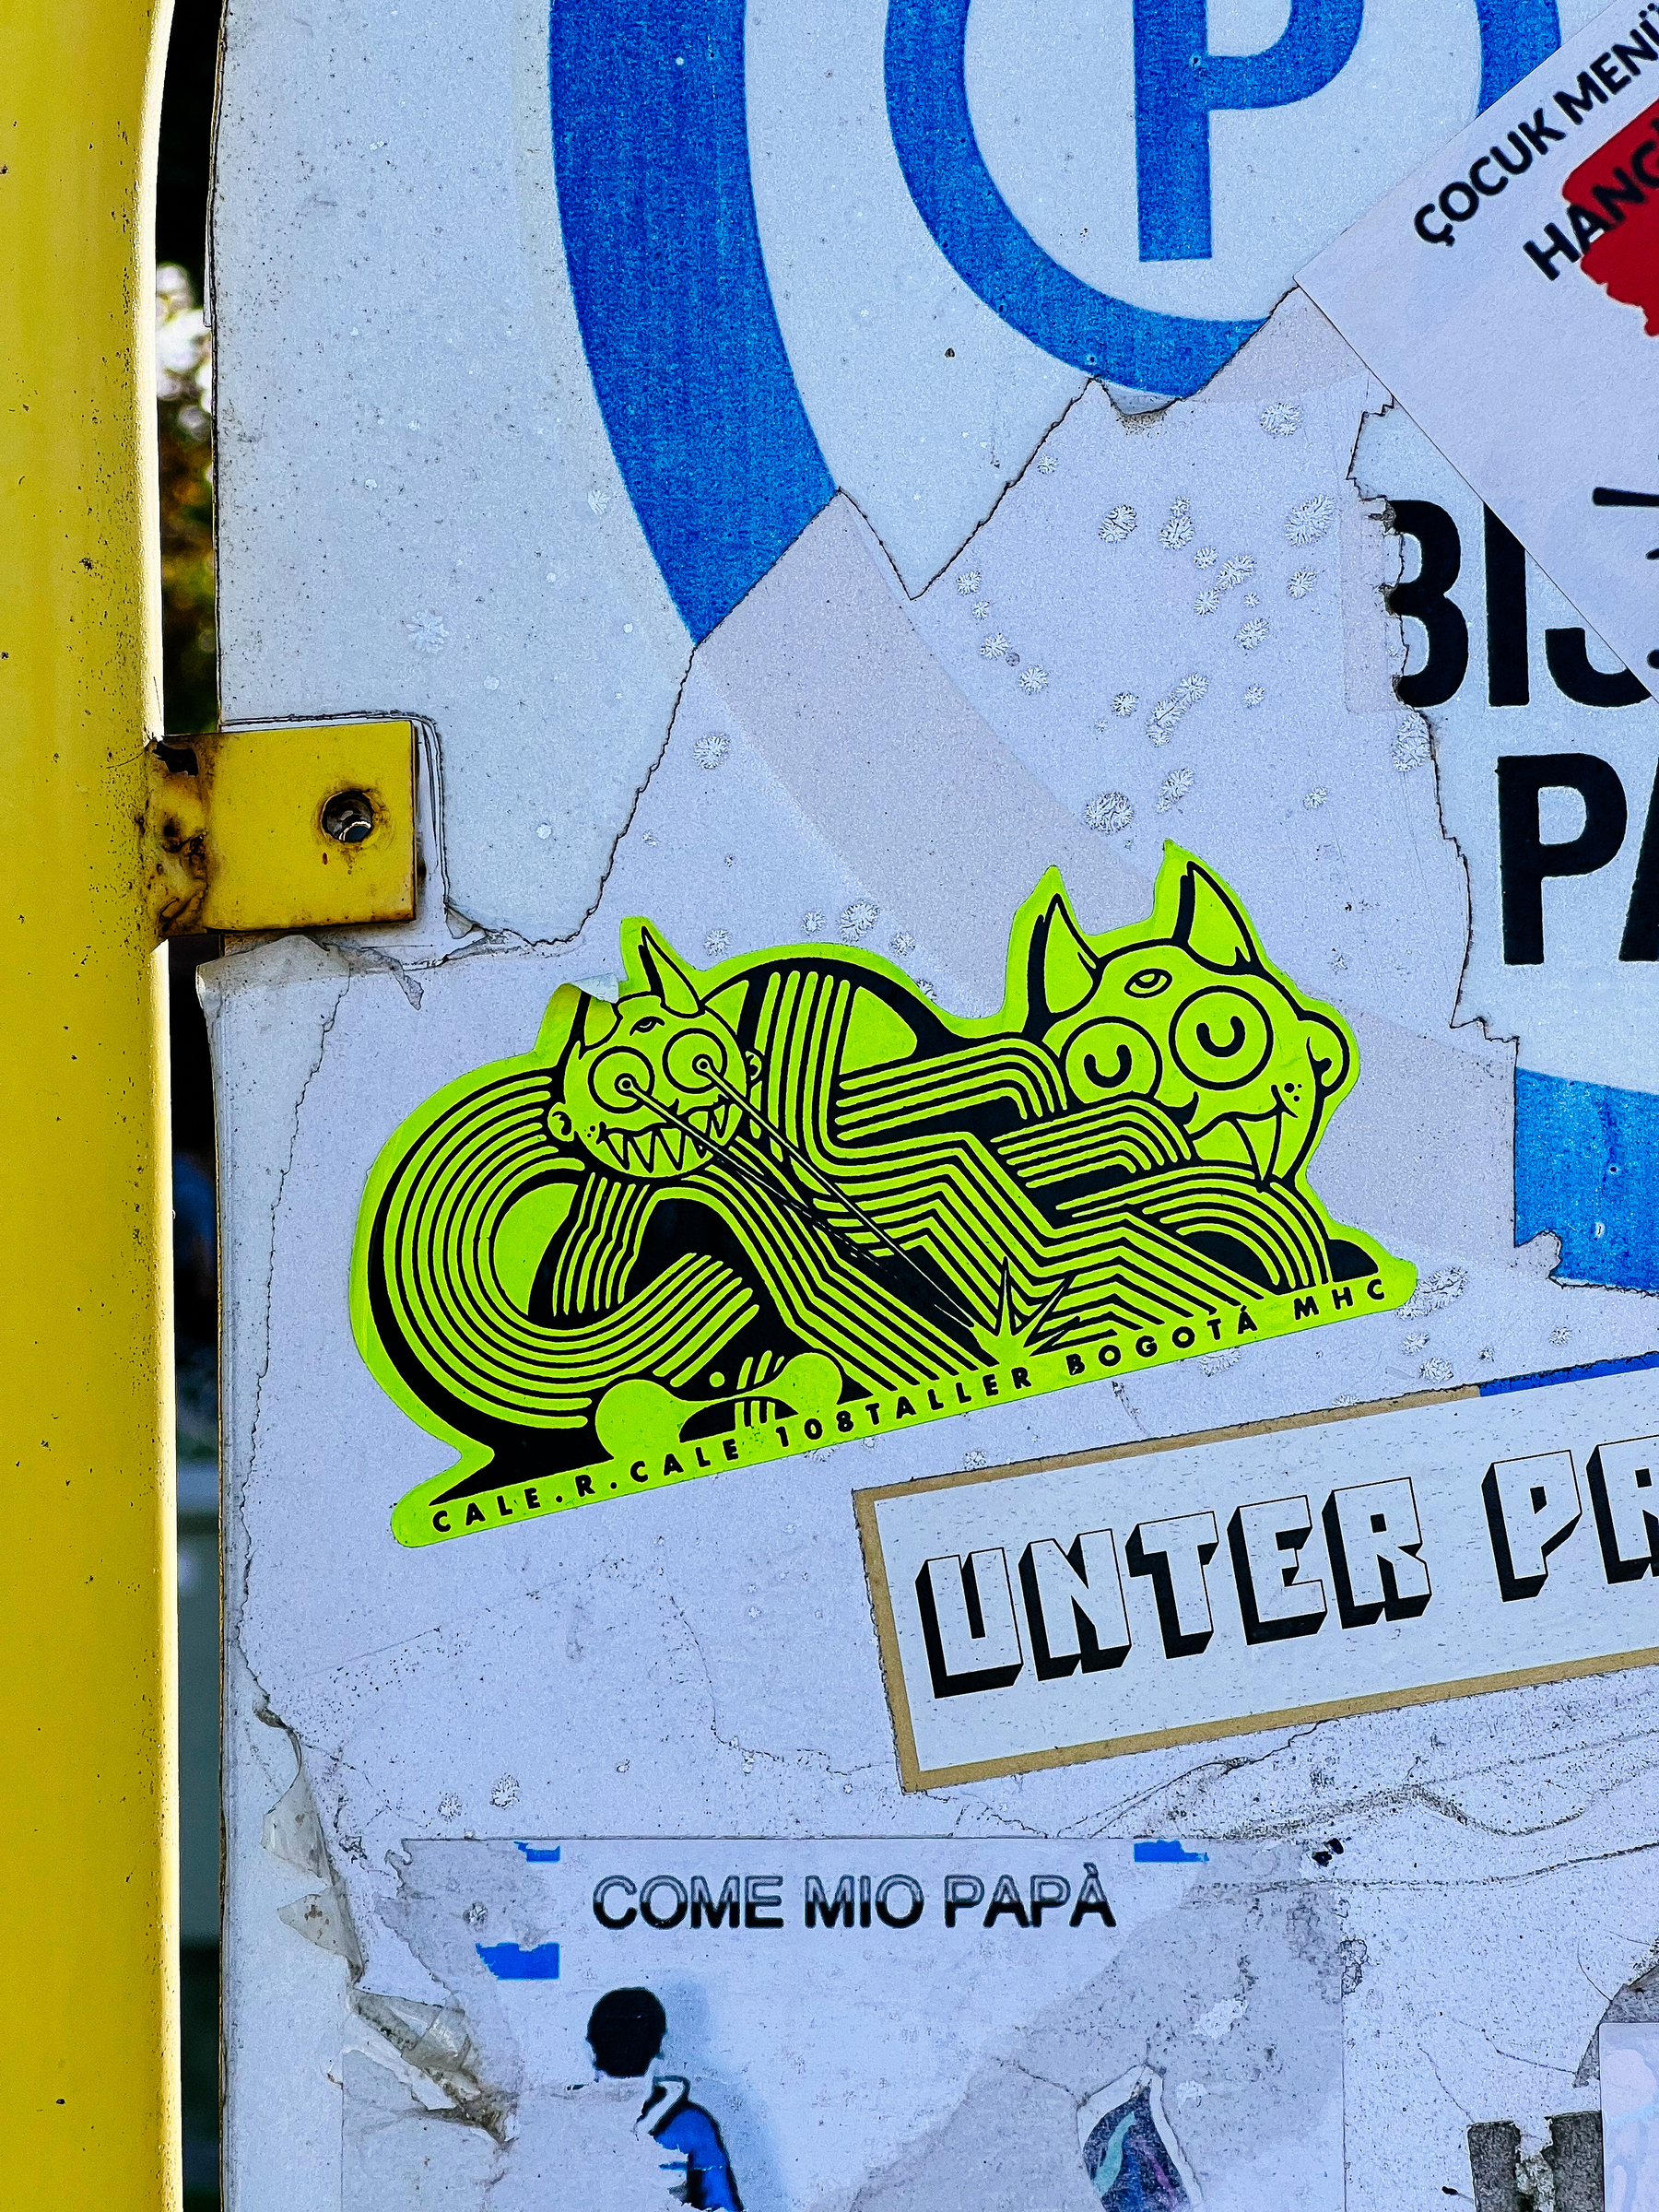 A neon green sticker depicting two stylized cats with large eyes is affixed to a weathered sign among other stickers and graffiti.